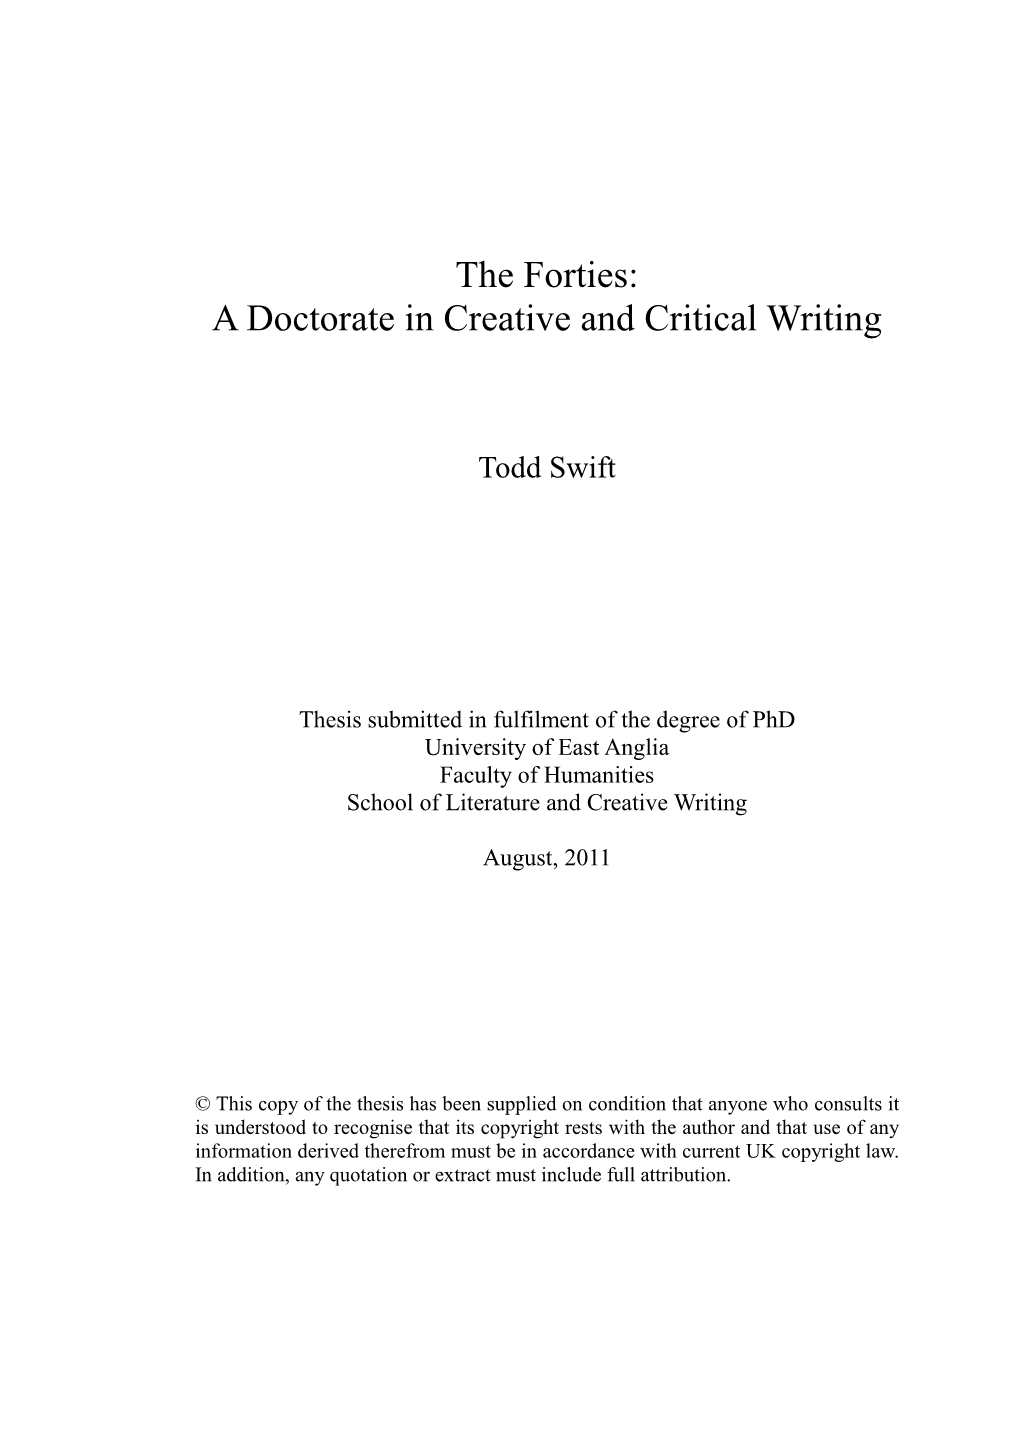 The Forties: a Doctorate in Creative and Critical Writing